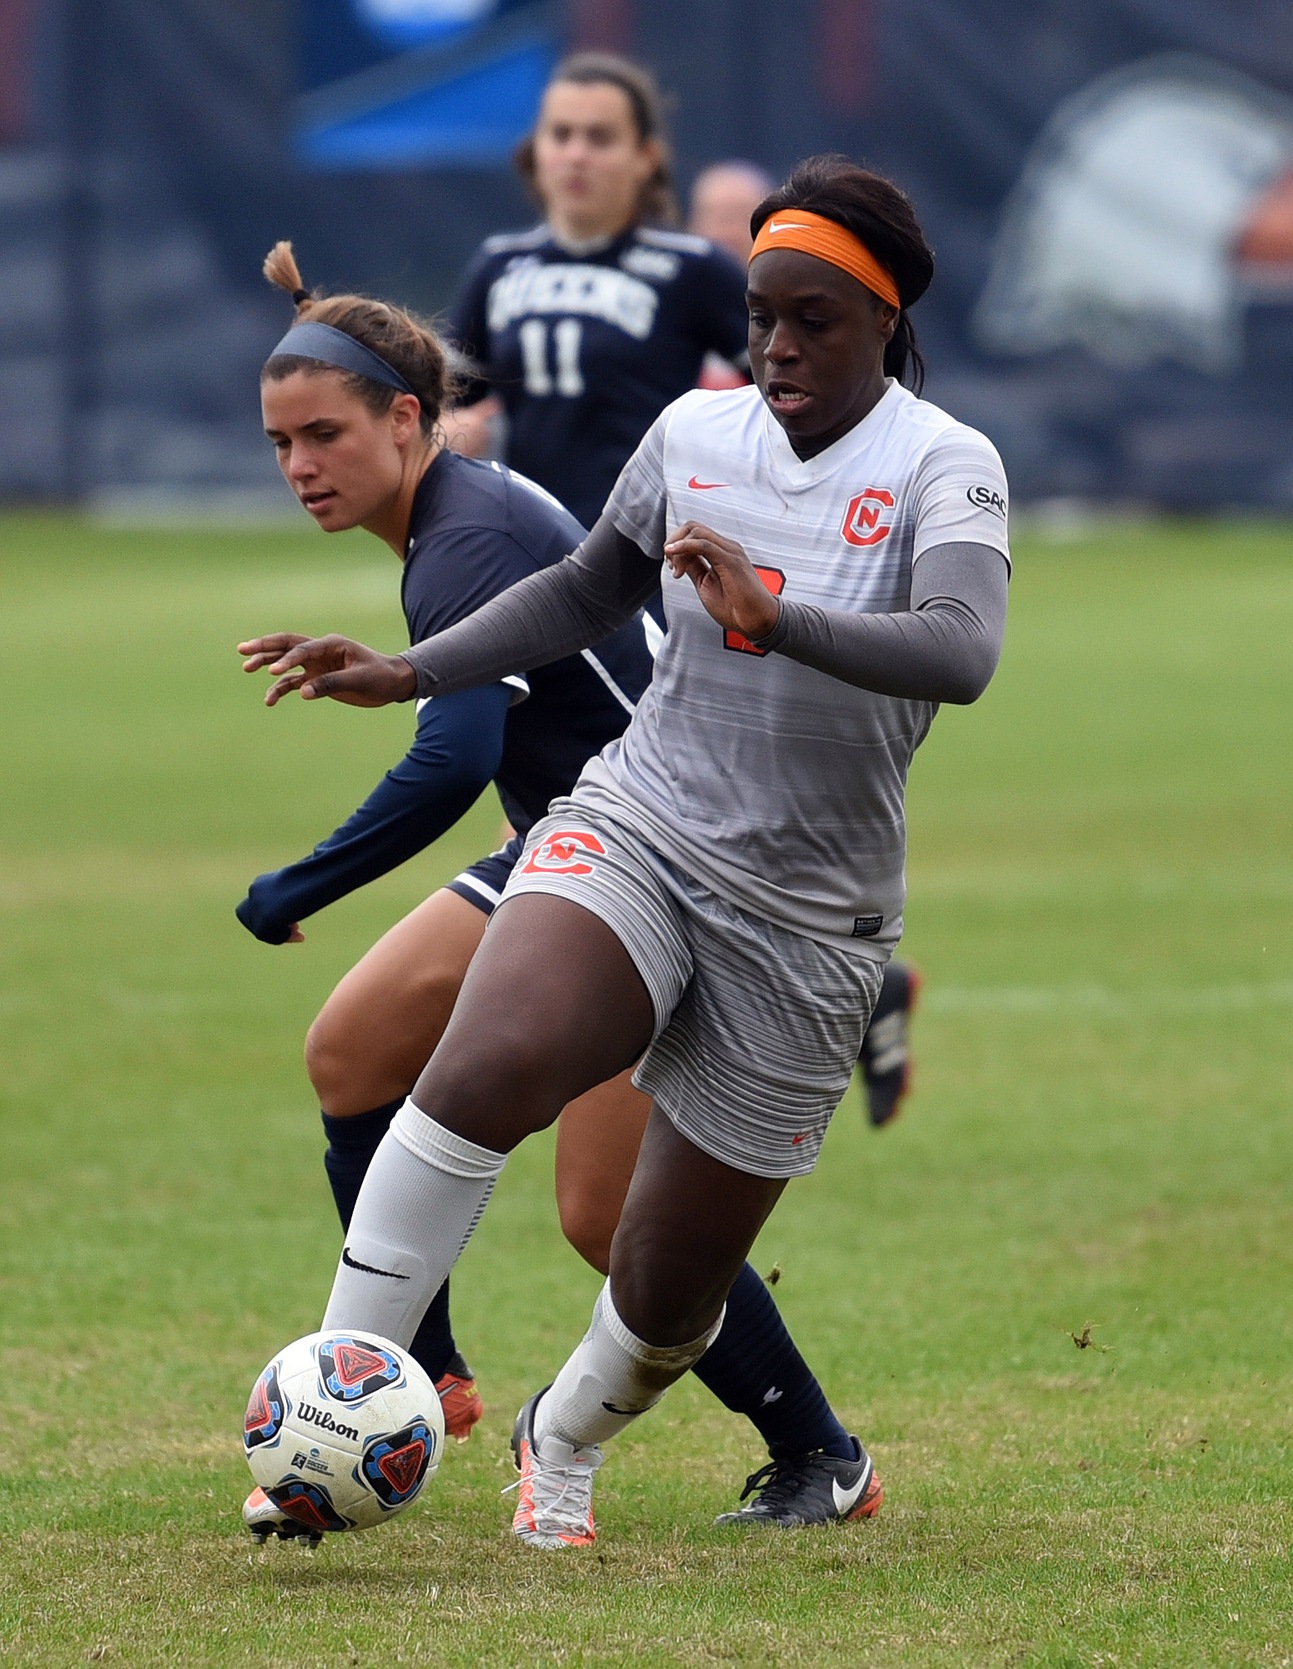 Carson-Newman Women's Soccer: Forwards Position Preview